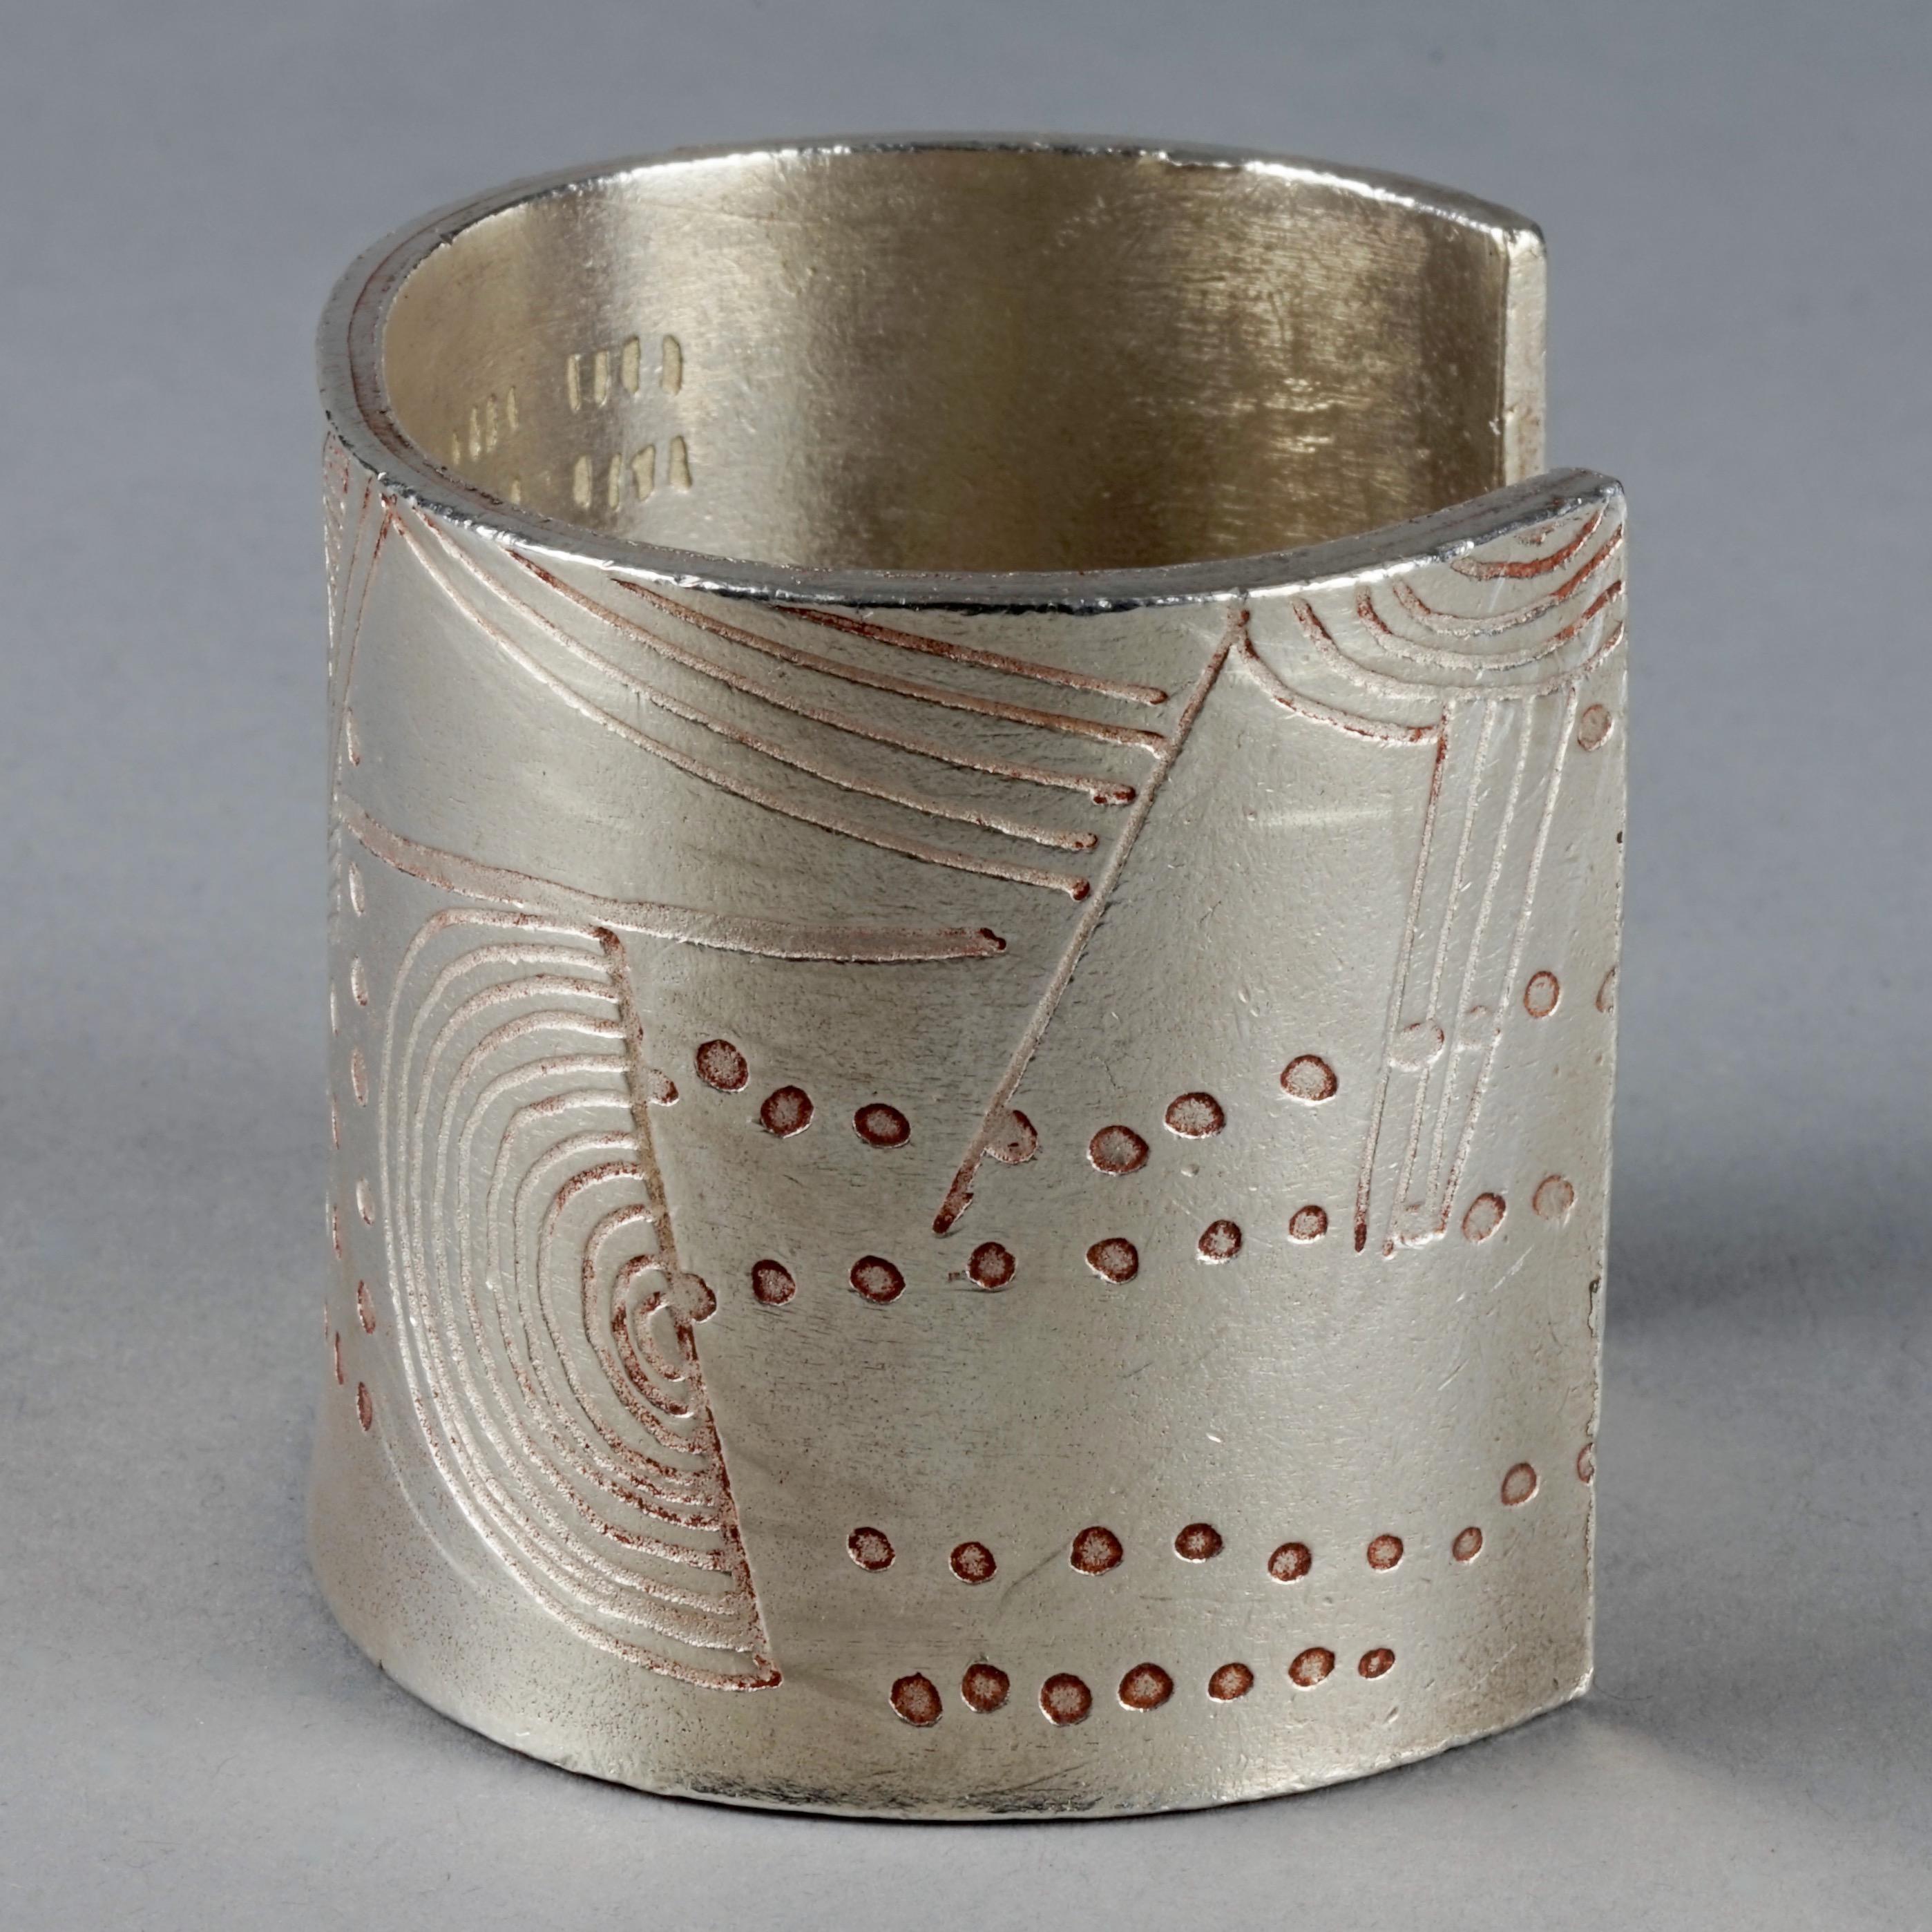 Vintage BICHE de BERE Engraved Abstract Pattern Silver Cuff Bracelet In Excellent Condition For Sale In Kingersheim, Alsace